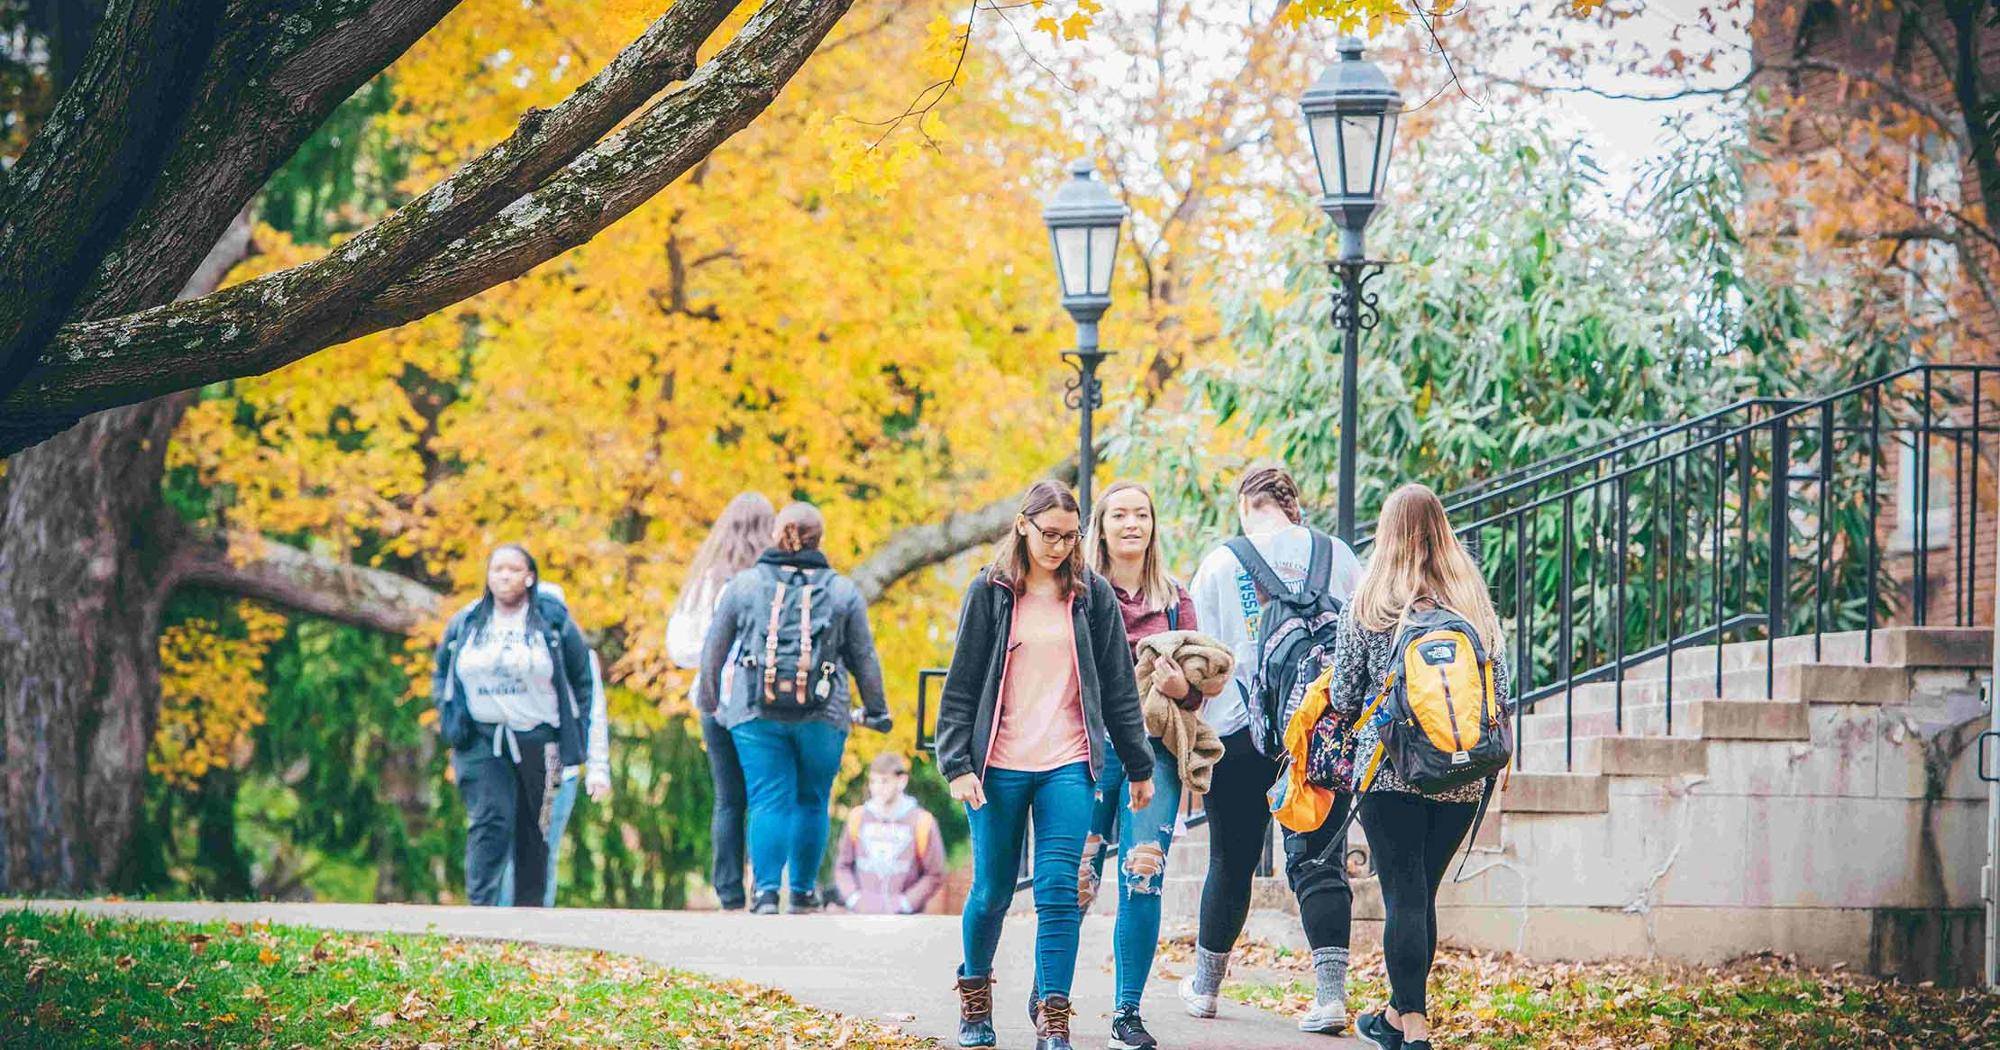 Students walk ETSU's main campus surrounded my fall color.